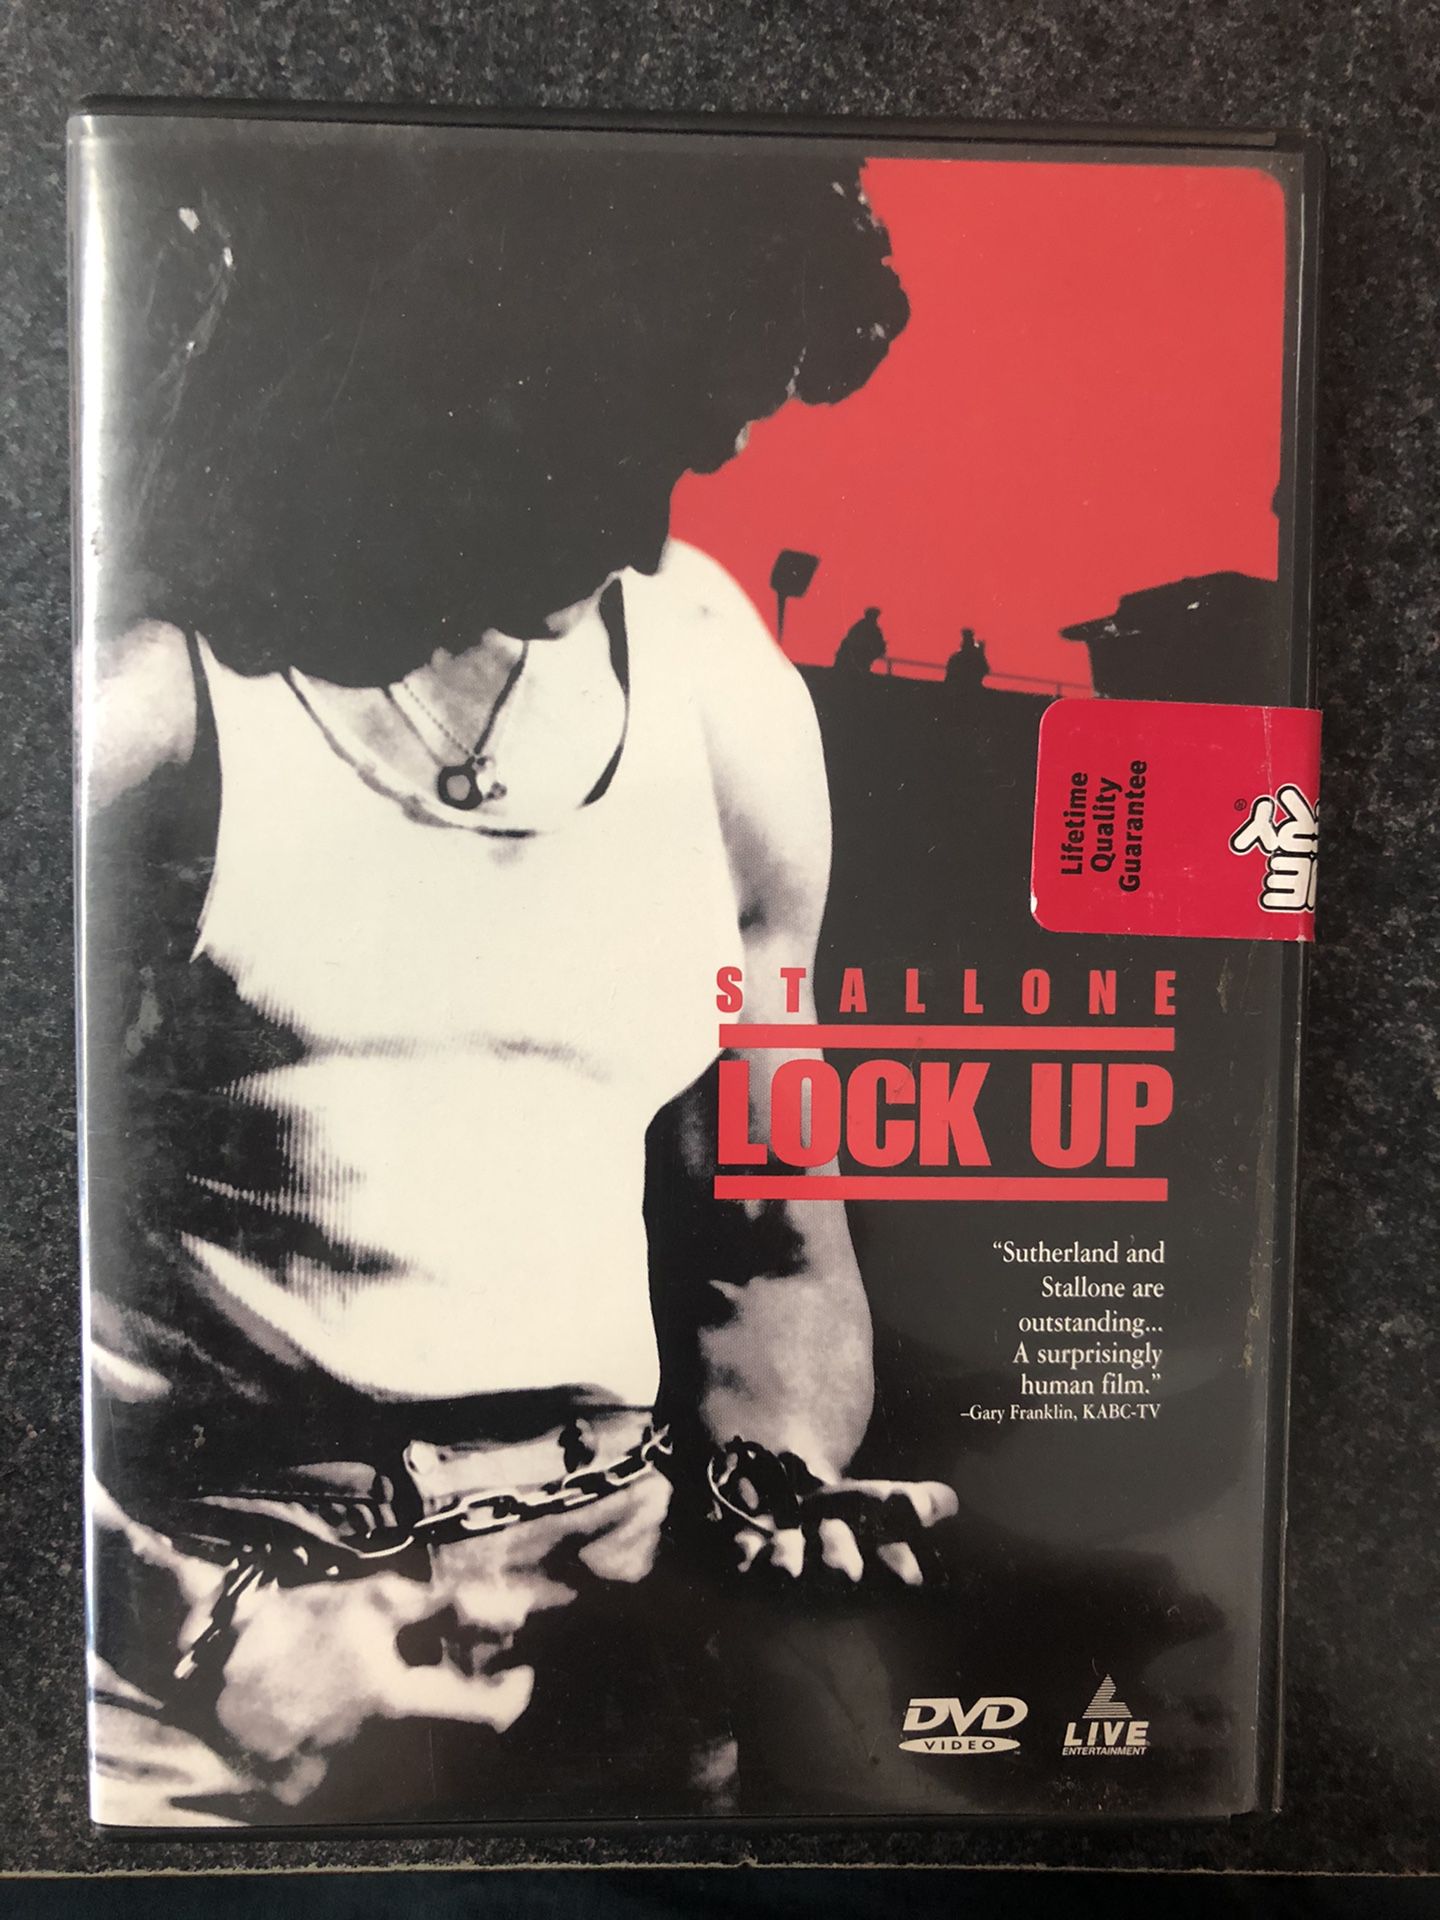 Stallone Lock Up DVD - used